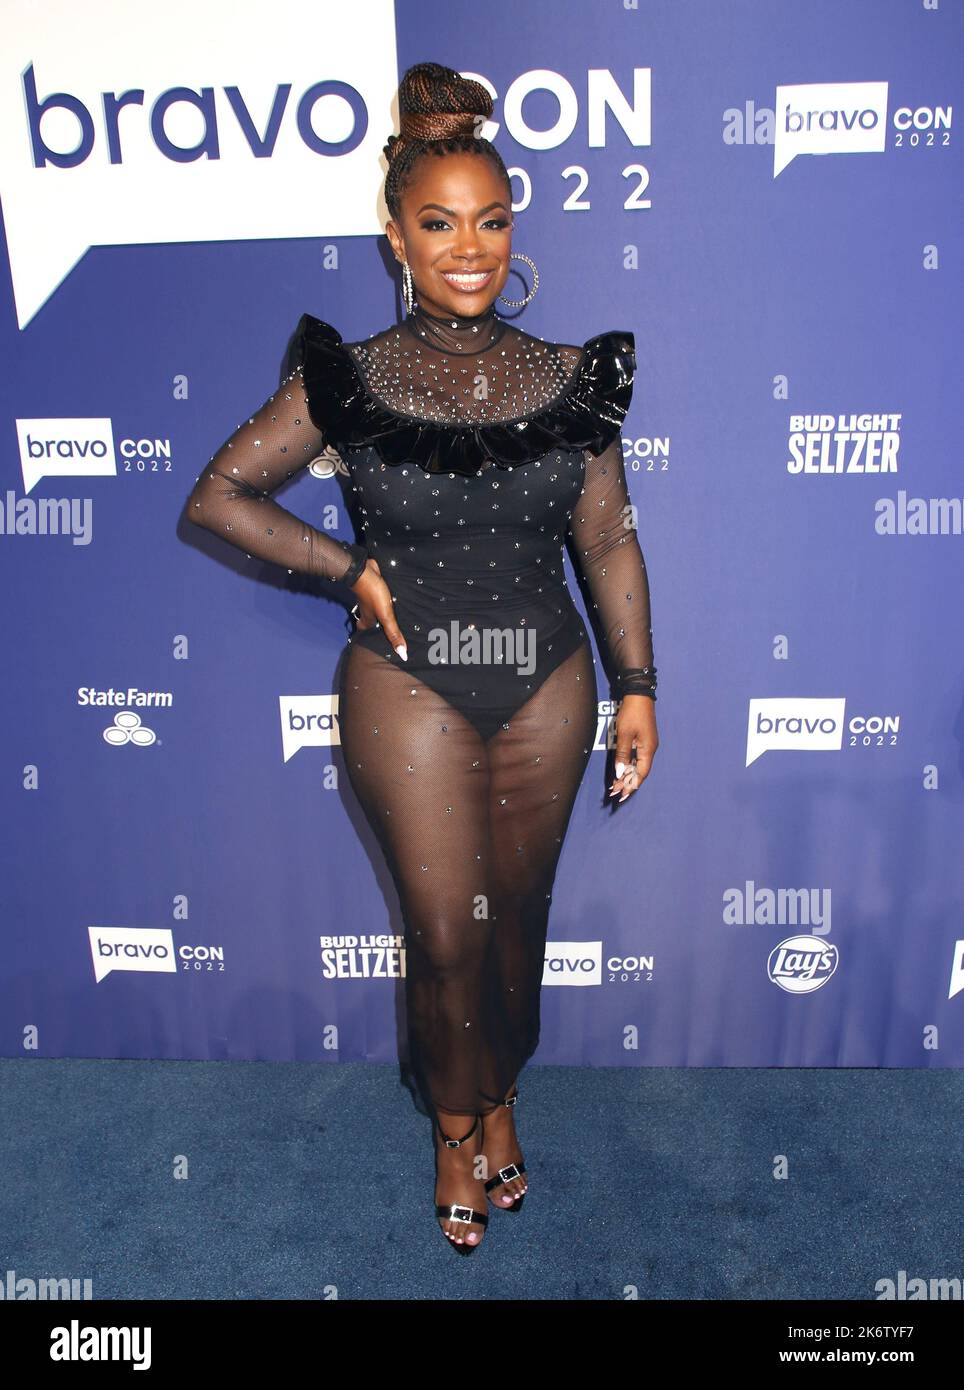 New York, USA. 14th Oct, 2022. Kandi Burruss attending Andy's Legends Ball Red Carpet at BravoCon held at Manhattan Center on October 14, 2022 in New York City, NY ©Steven Bergman/AFF-USA.COM Credit: AFF/Alamy Live News Stock Photo